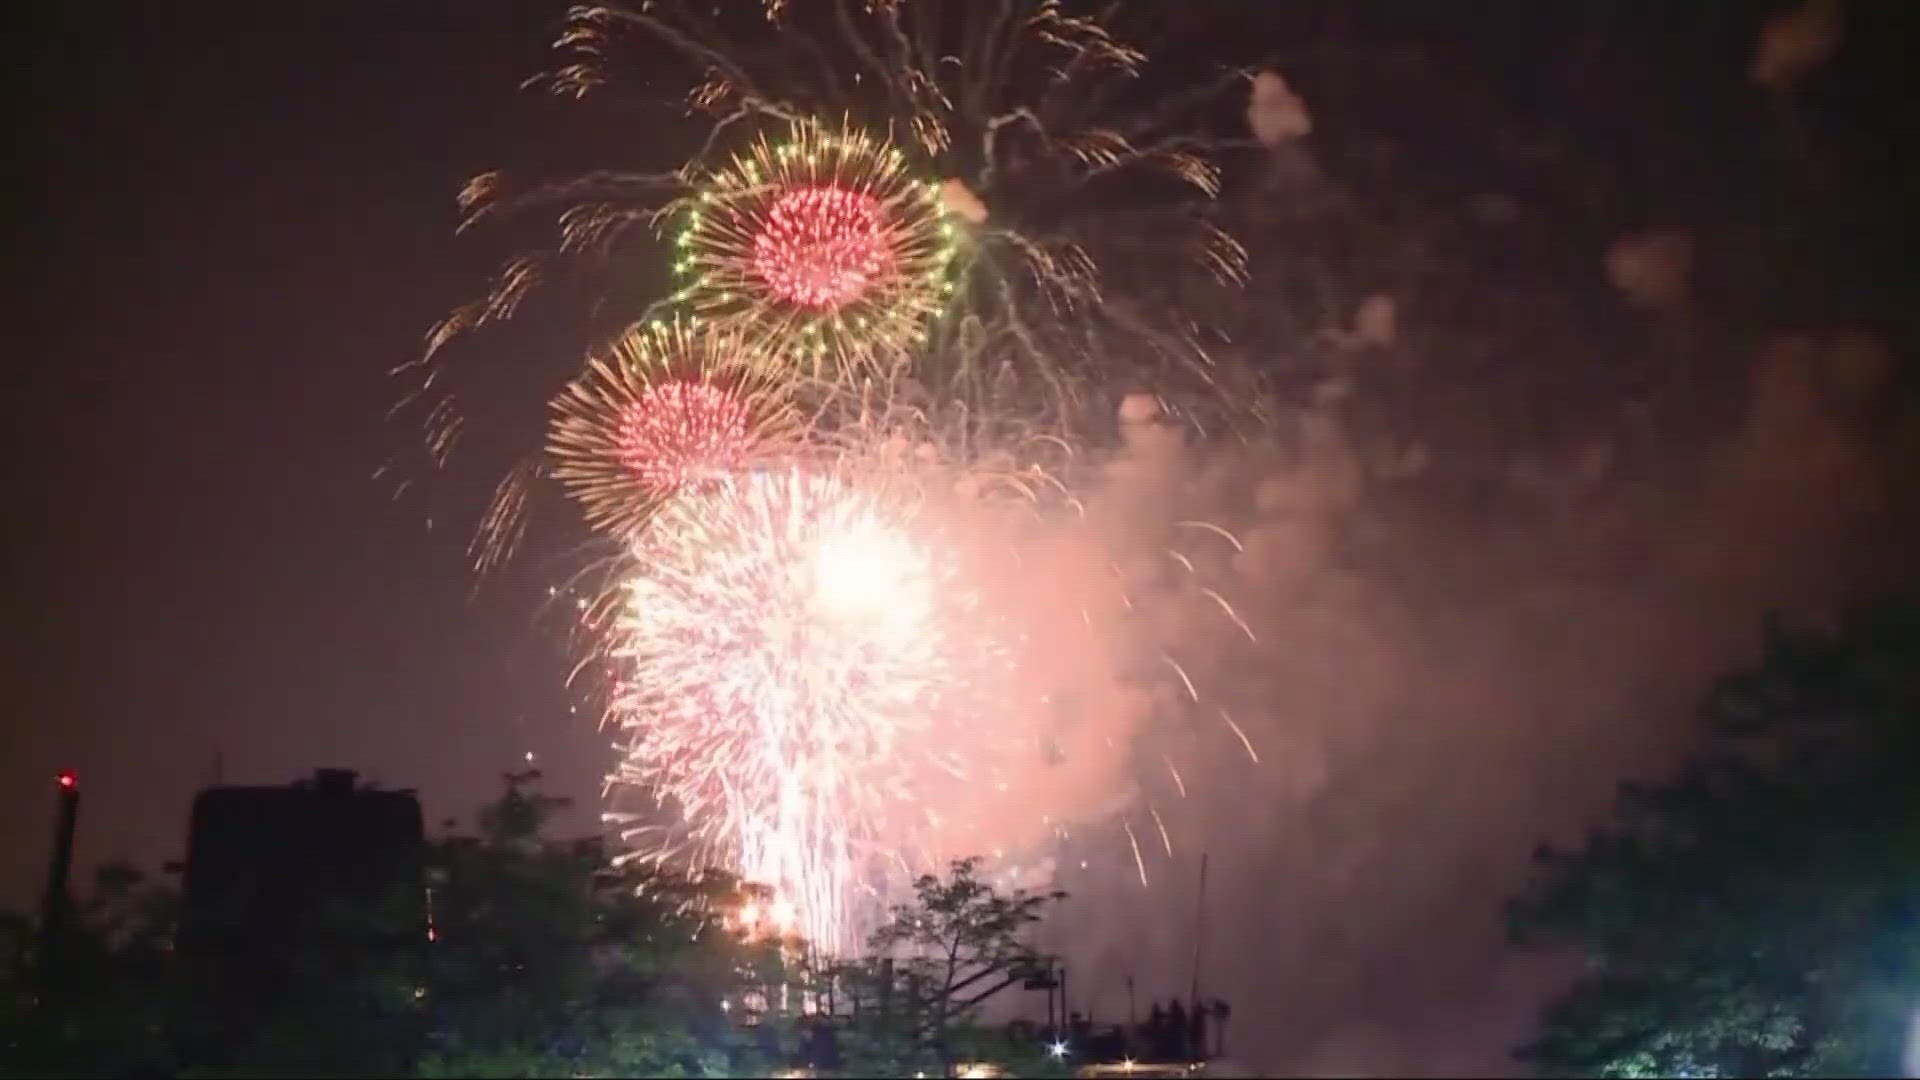 Many cities across Northeast Ohio are hosting firework celebrations on Fourth of July weekend.